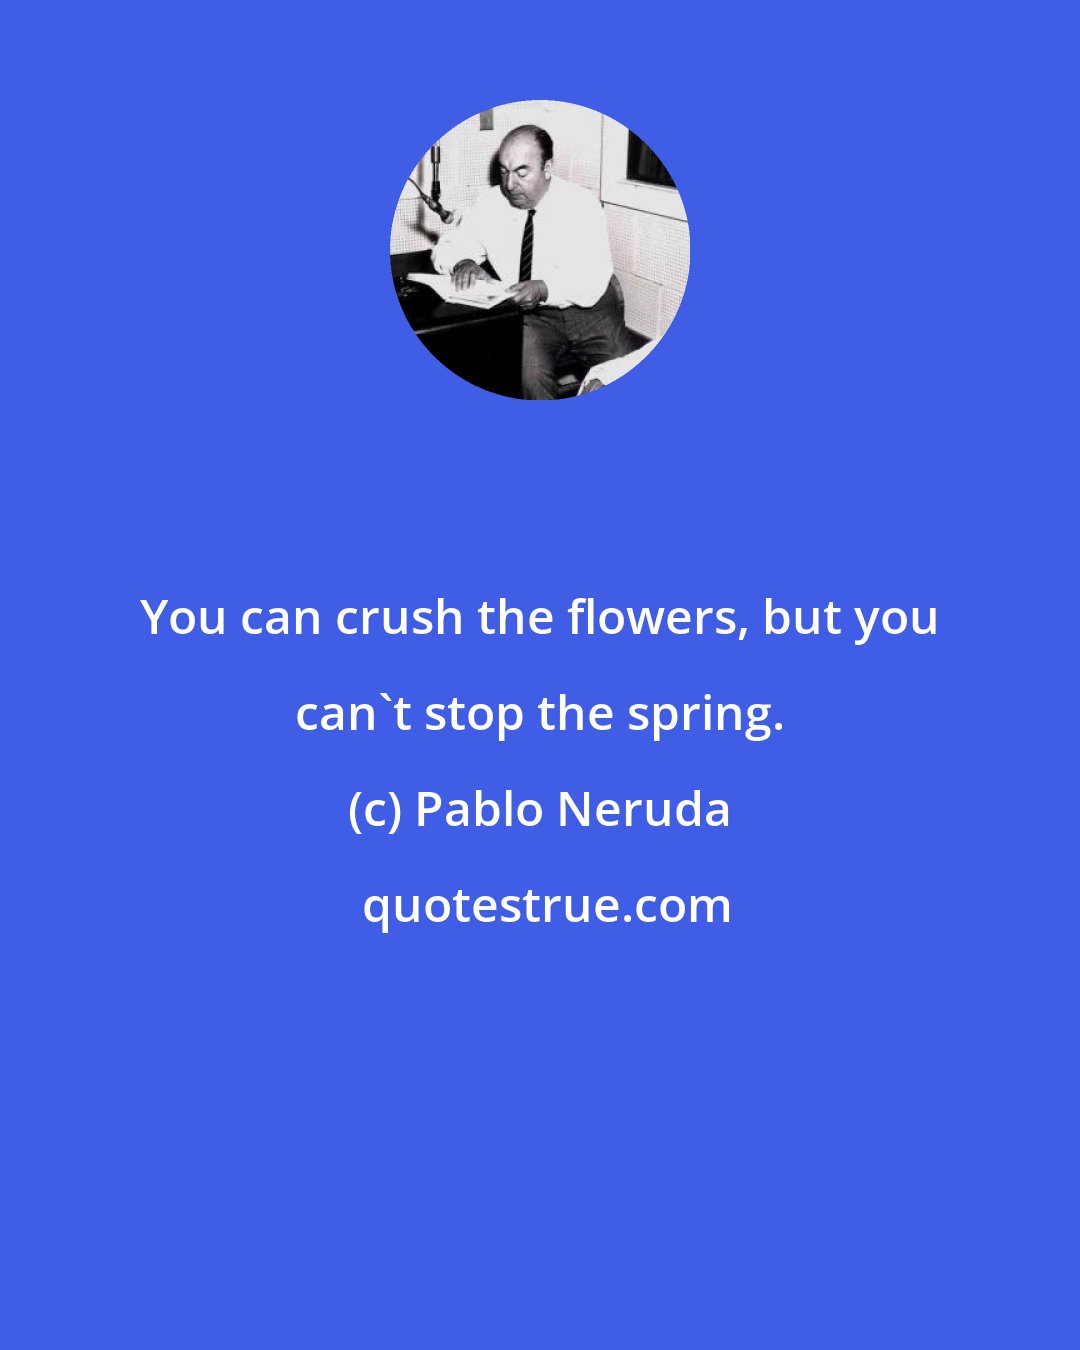 Pablo Neruda: You can crush the flowers, but you can't stop the spring.